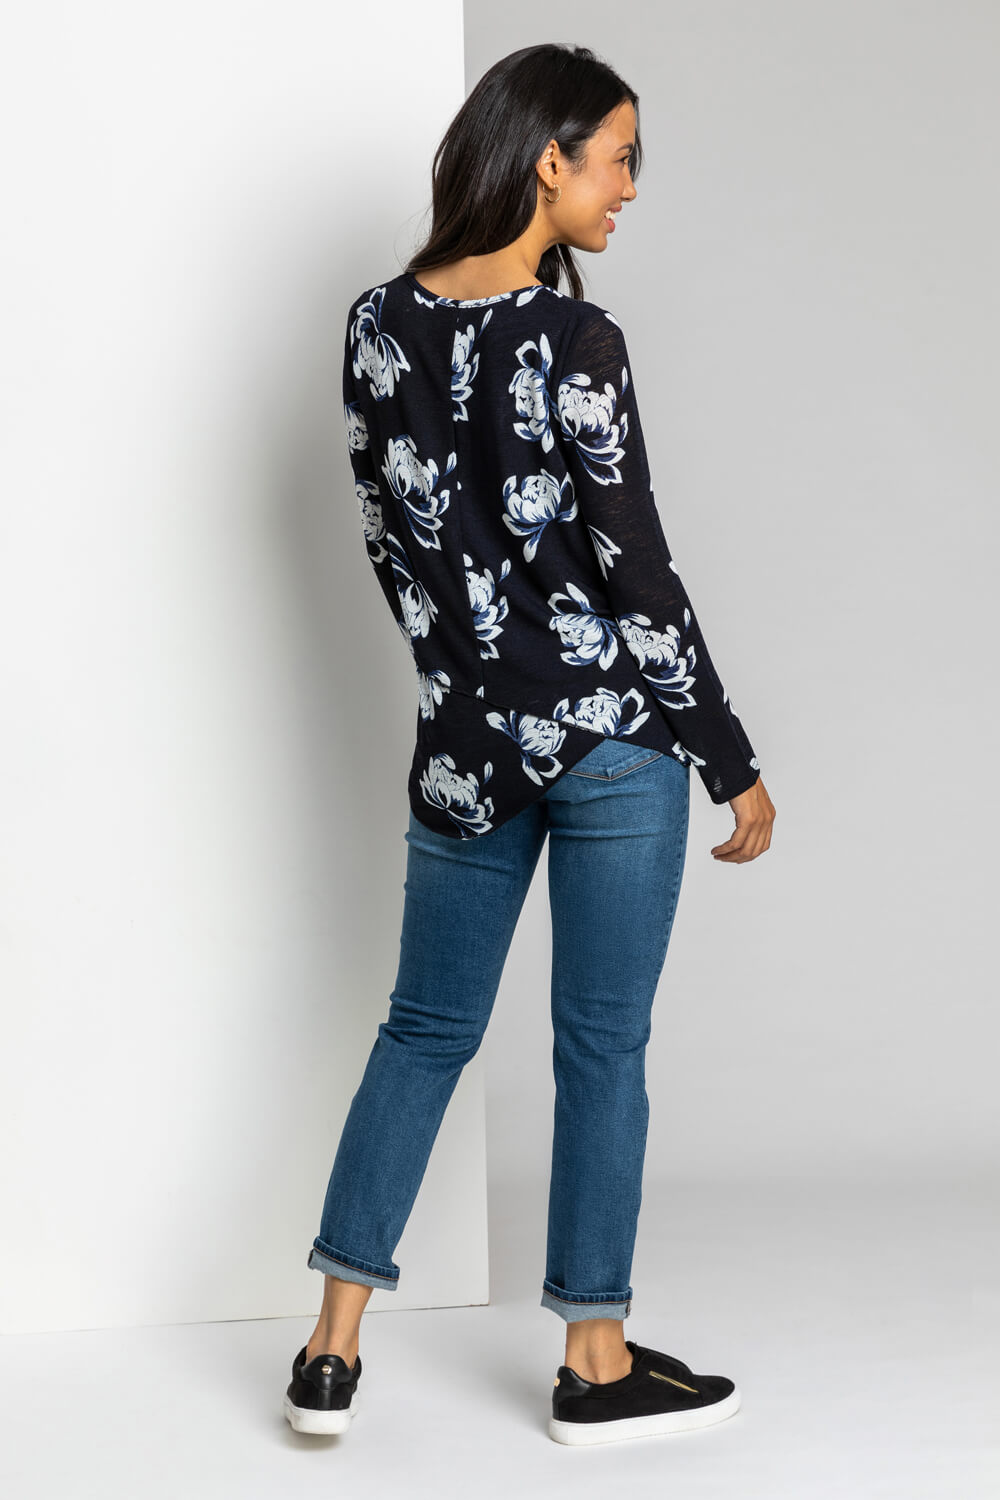 Navy  Floral Print Layered Asymmetric Tunic Top, Image 2 of 5